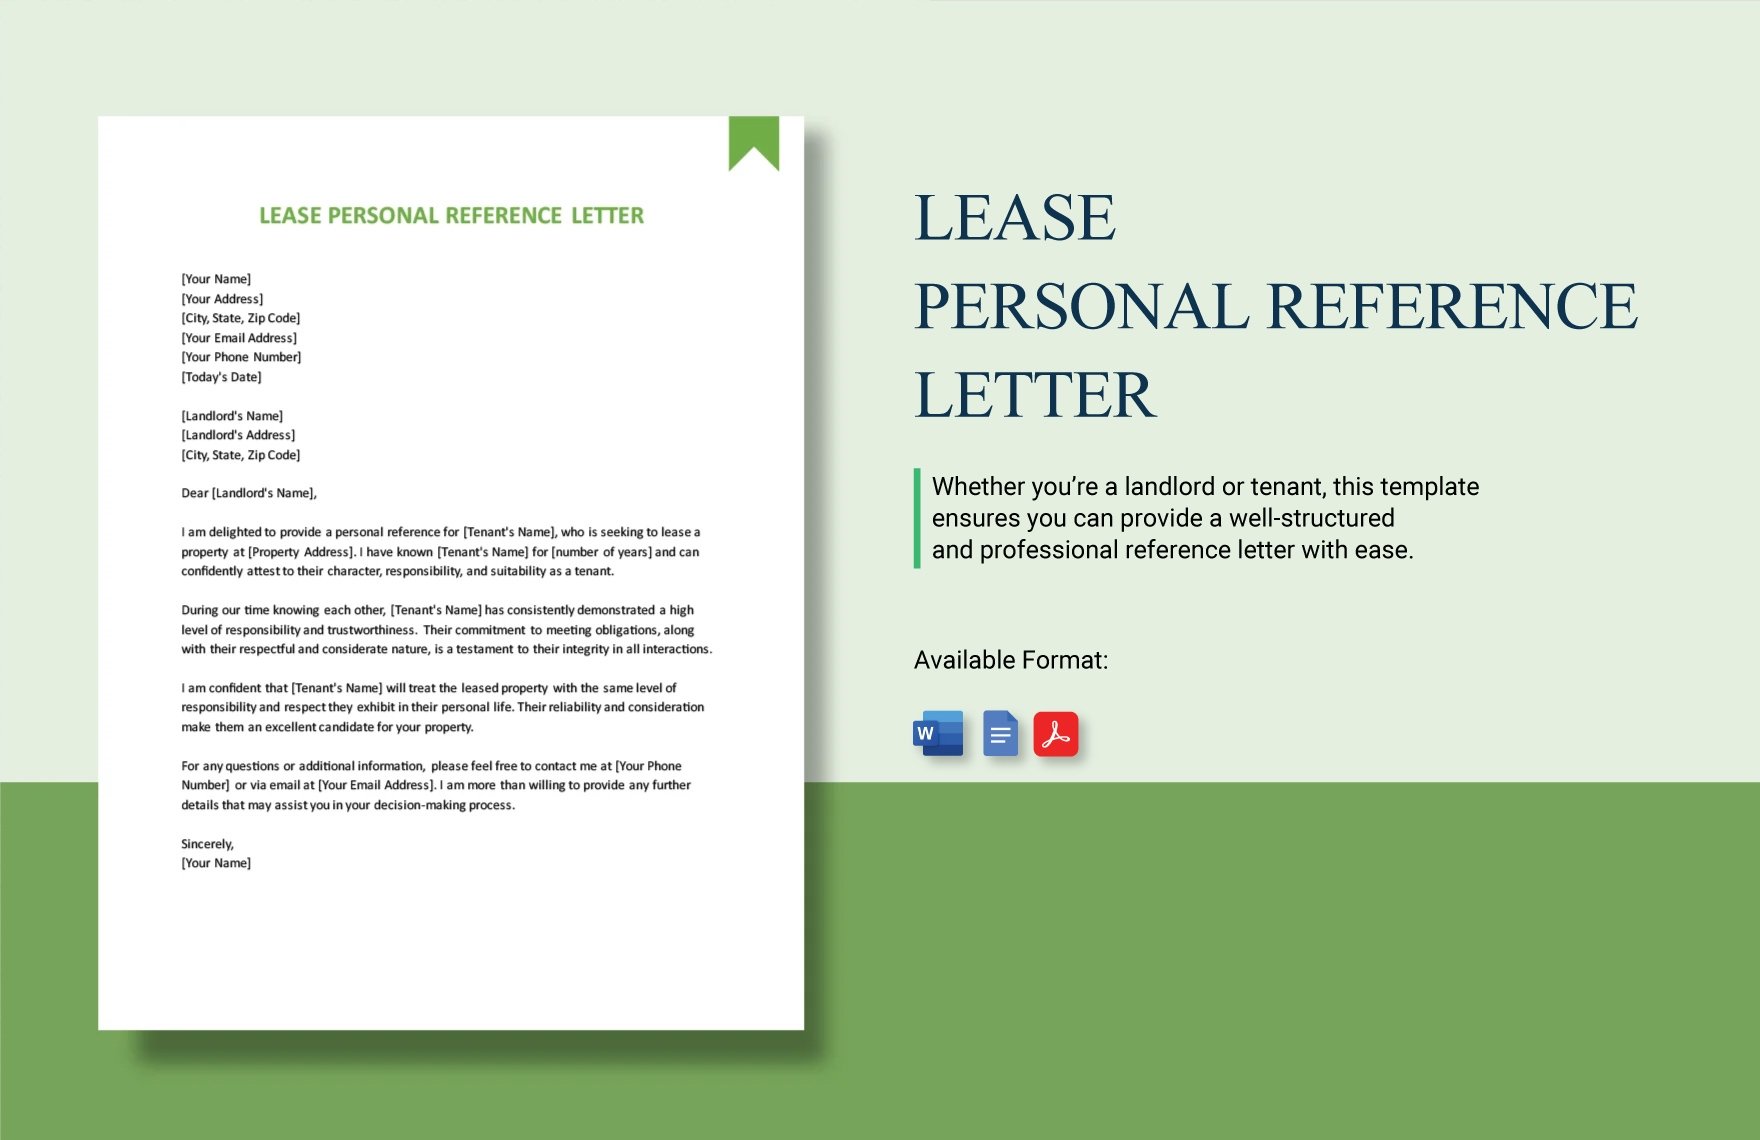 Lease Personal Reference Letter in Word, Google Docs, PDF